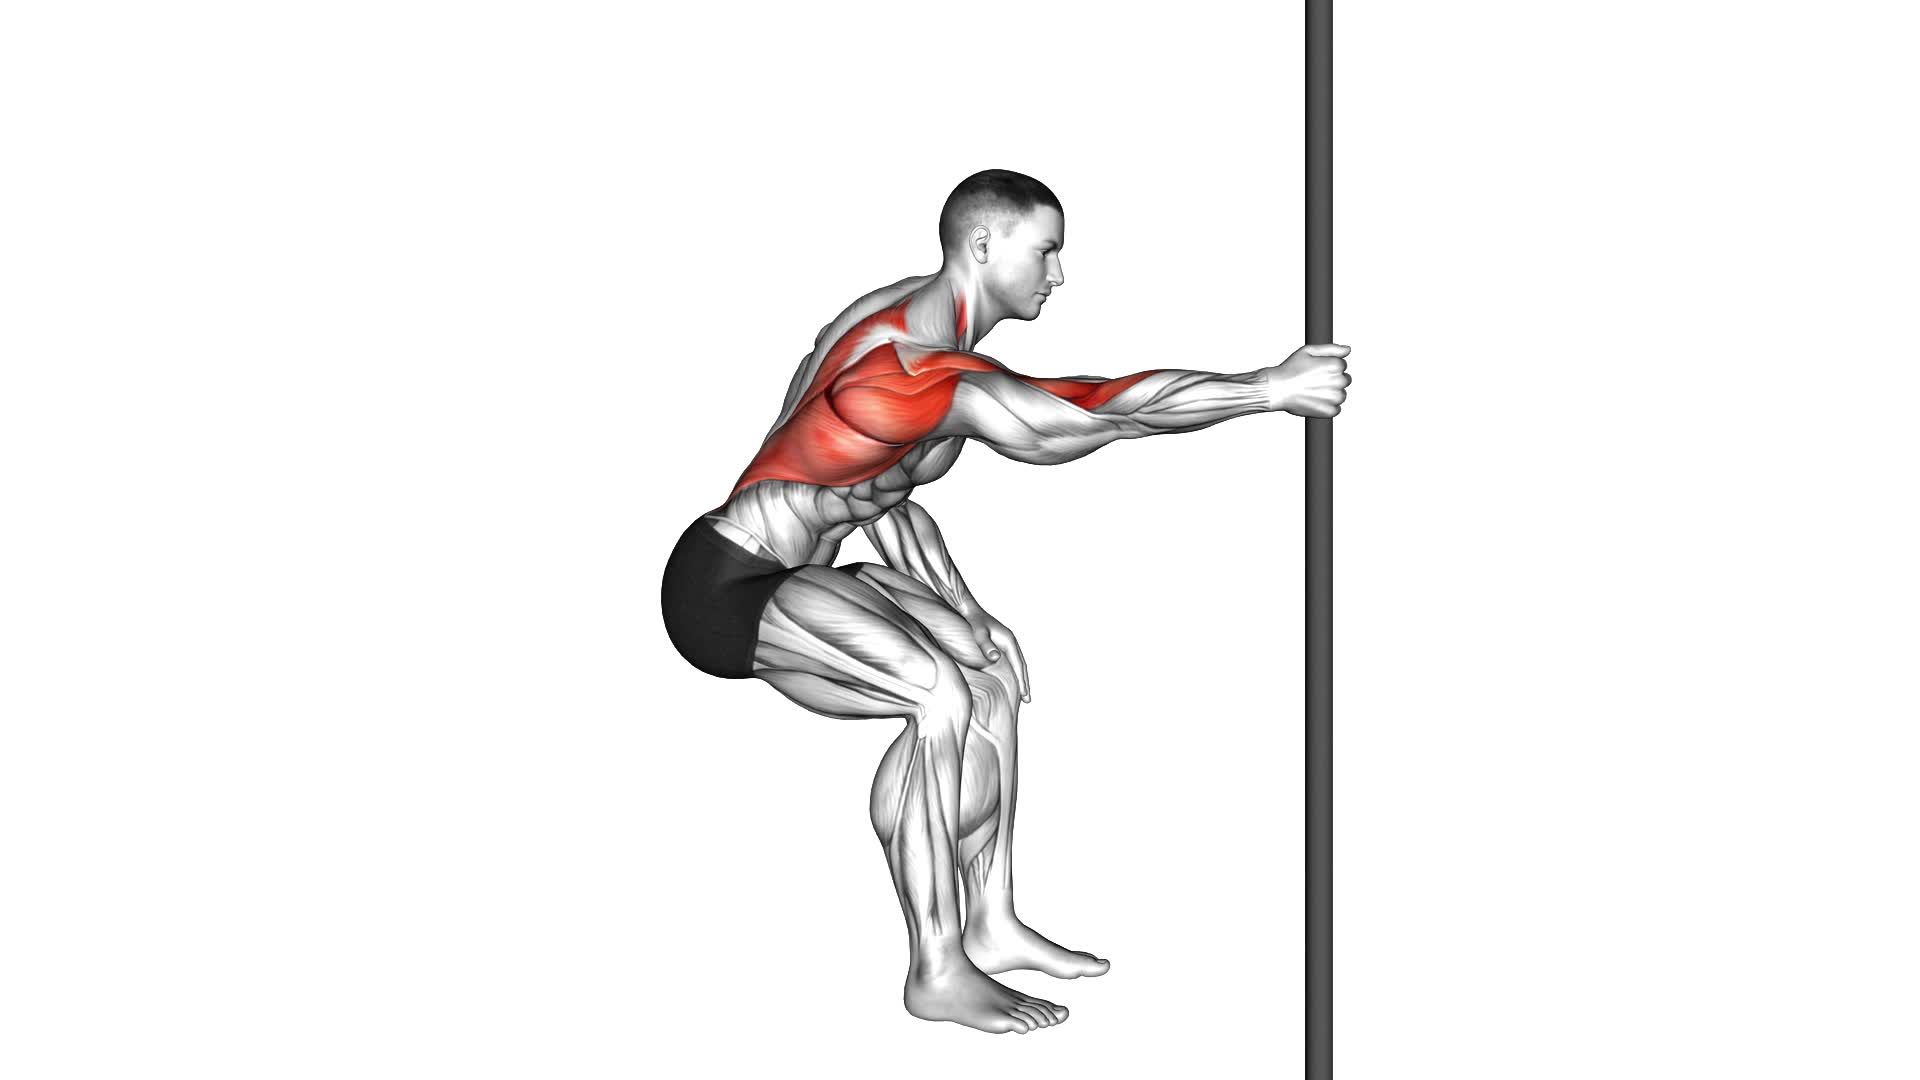 Fixed Bar Back Stretch - Video Exercise Guide & Tips